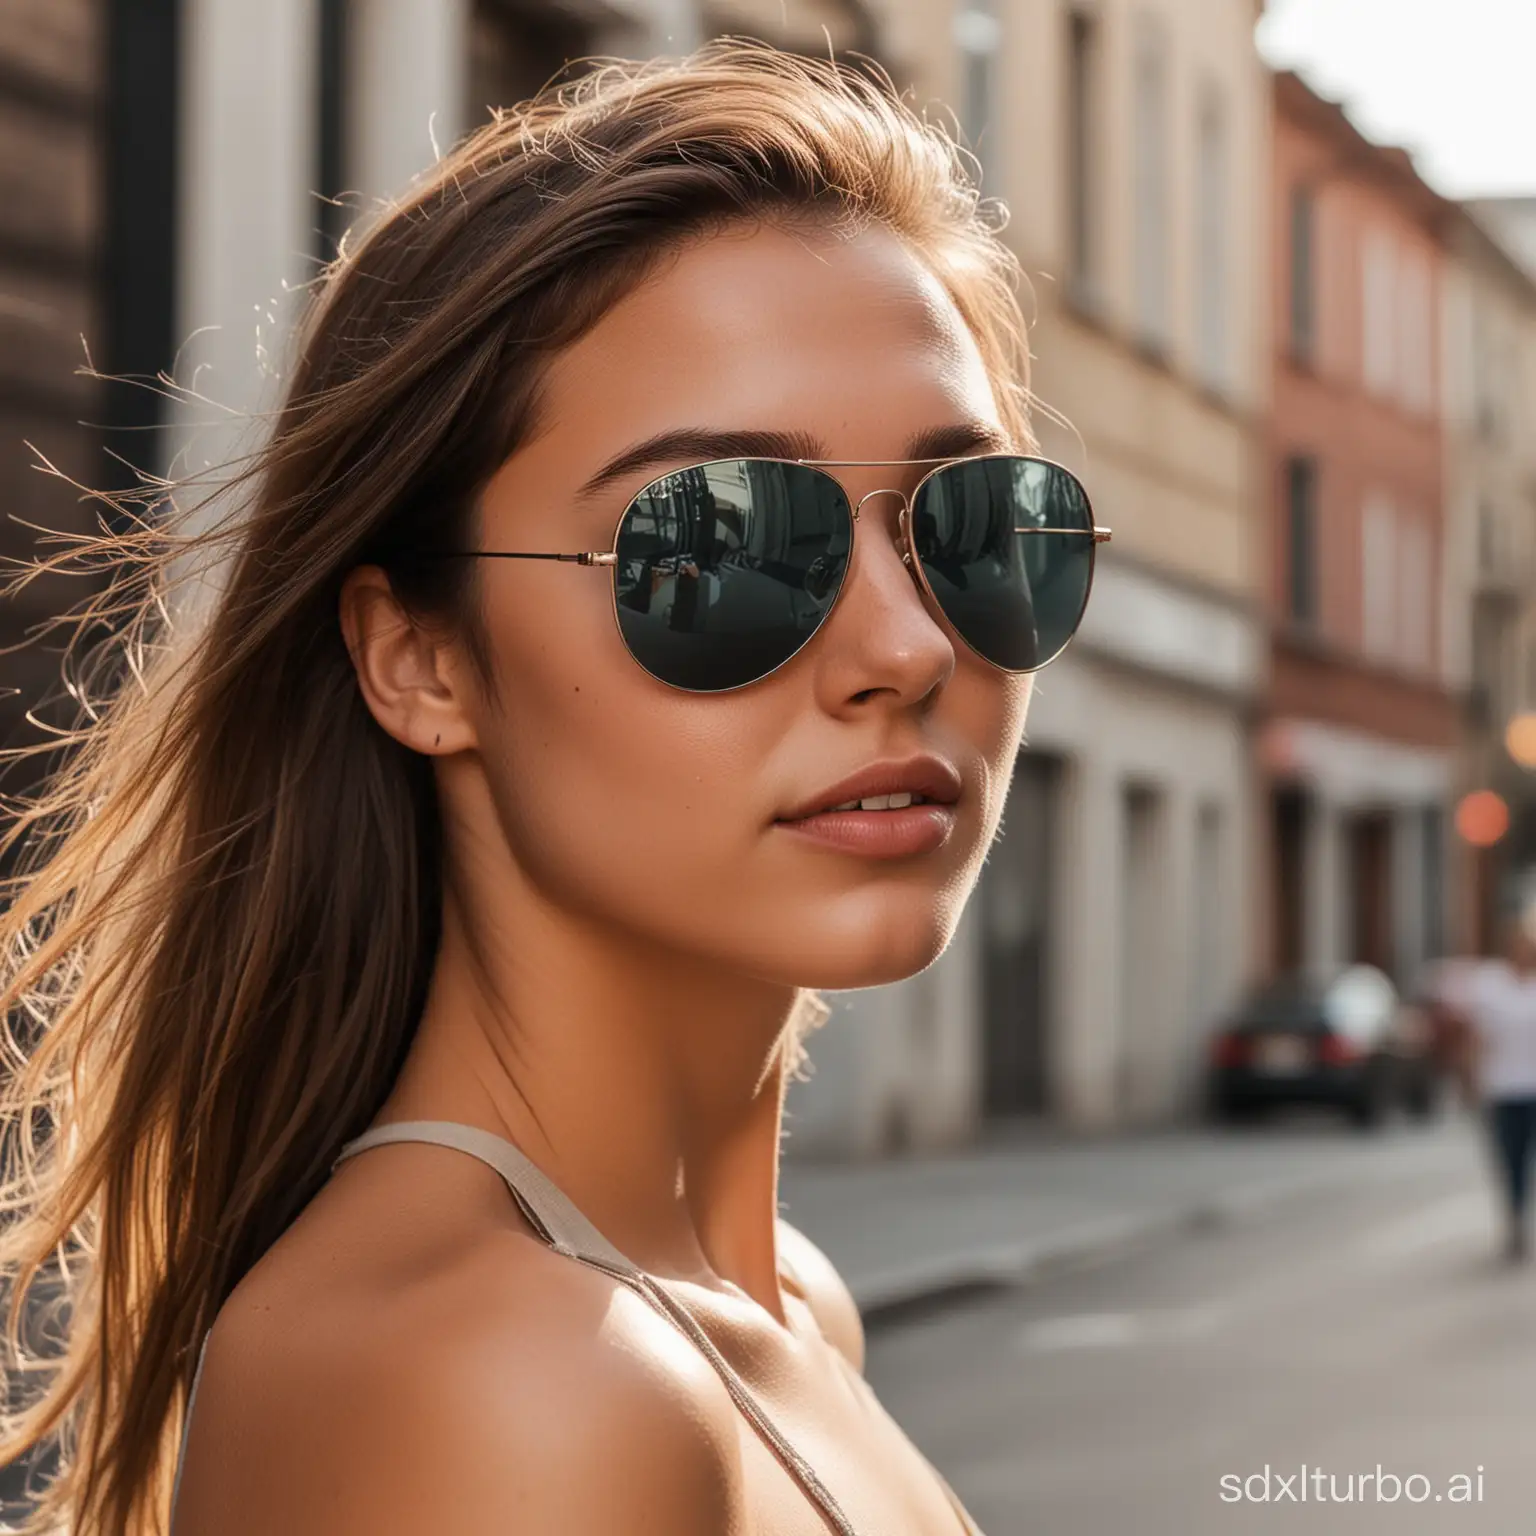 Cool-Girl-with-Aviator-Sunglasses-Walking-Down-the-Street